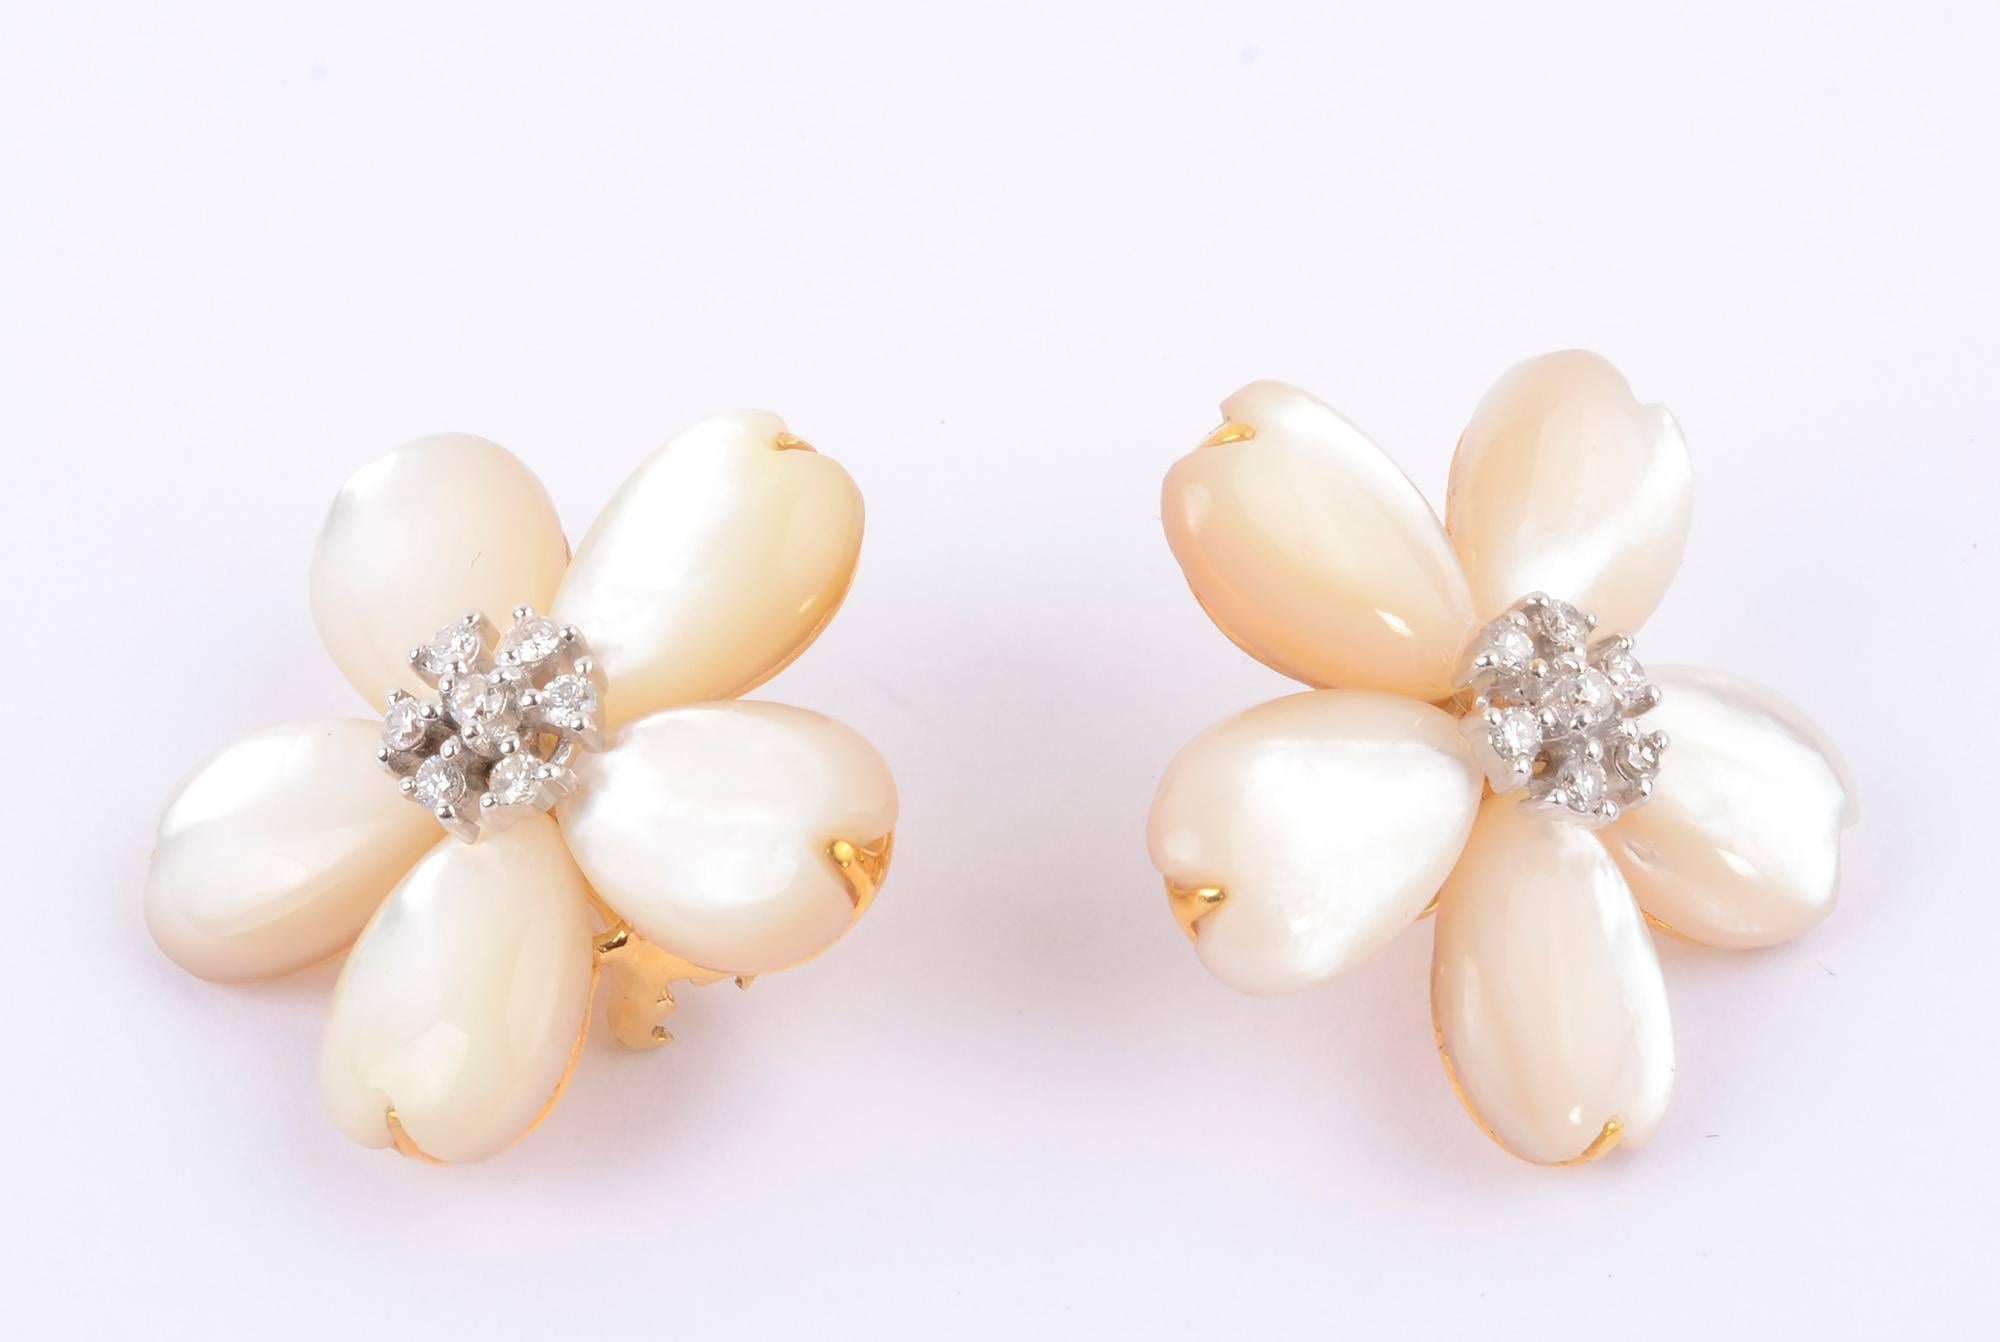 Light and graceful five petal flower earrings with the wonderful iridescence of mother of pearl. The centers are clusters of round brilliant cut diamonds weighing a total of .42 carats. The gold backings are brought around to the front of each